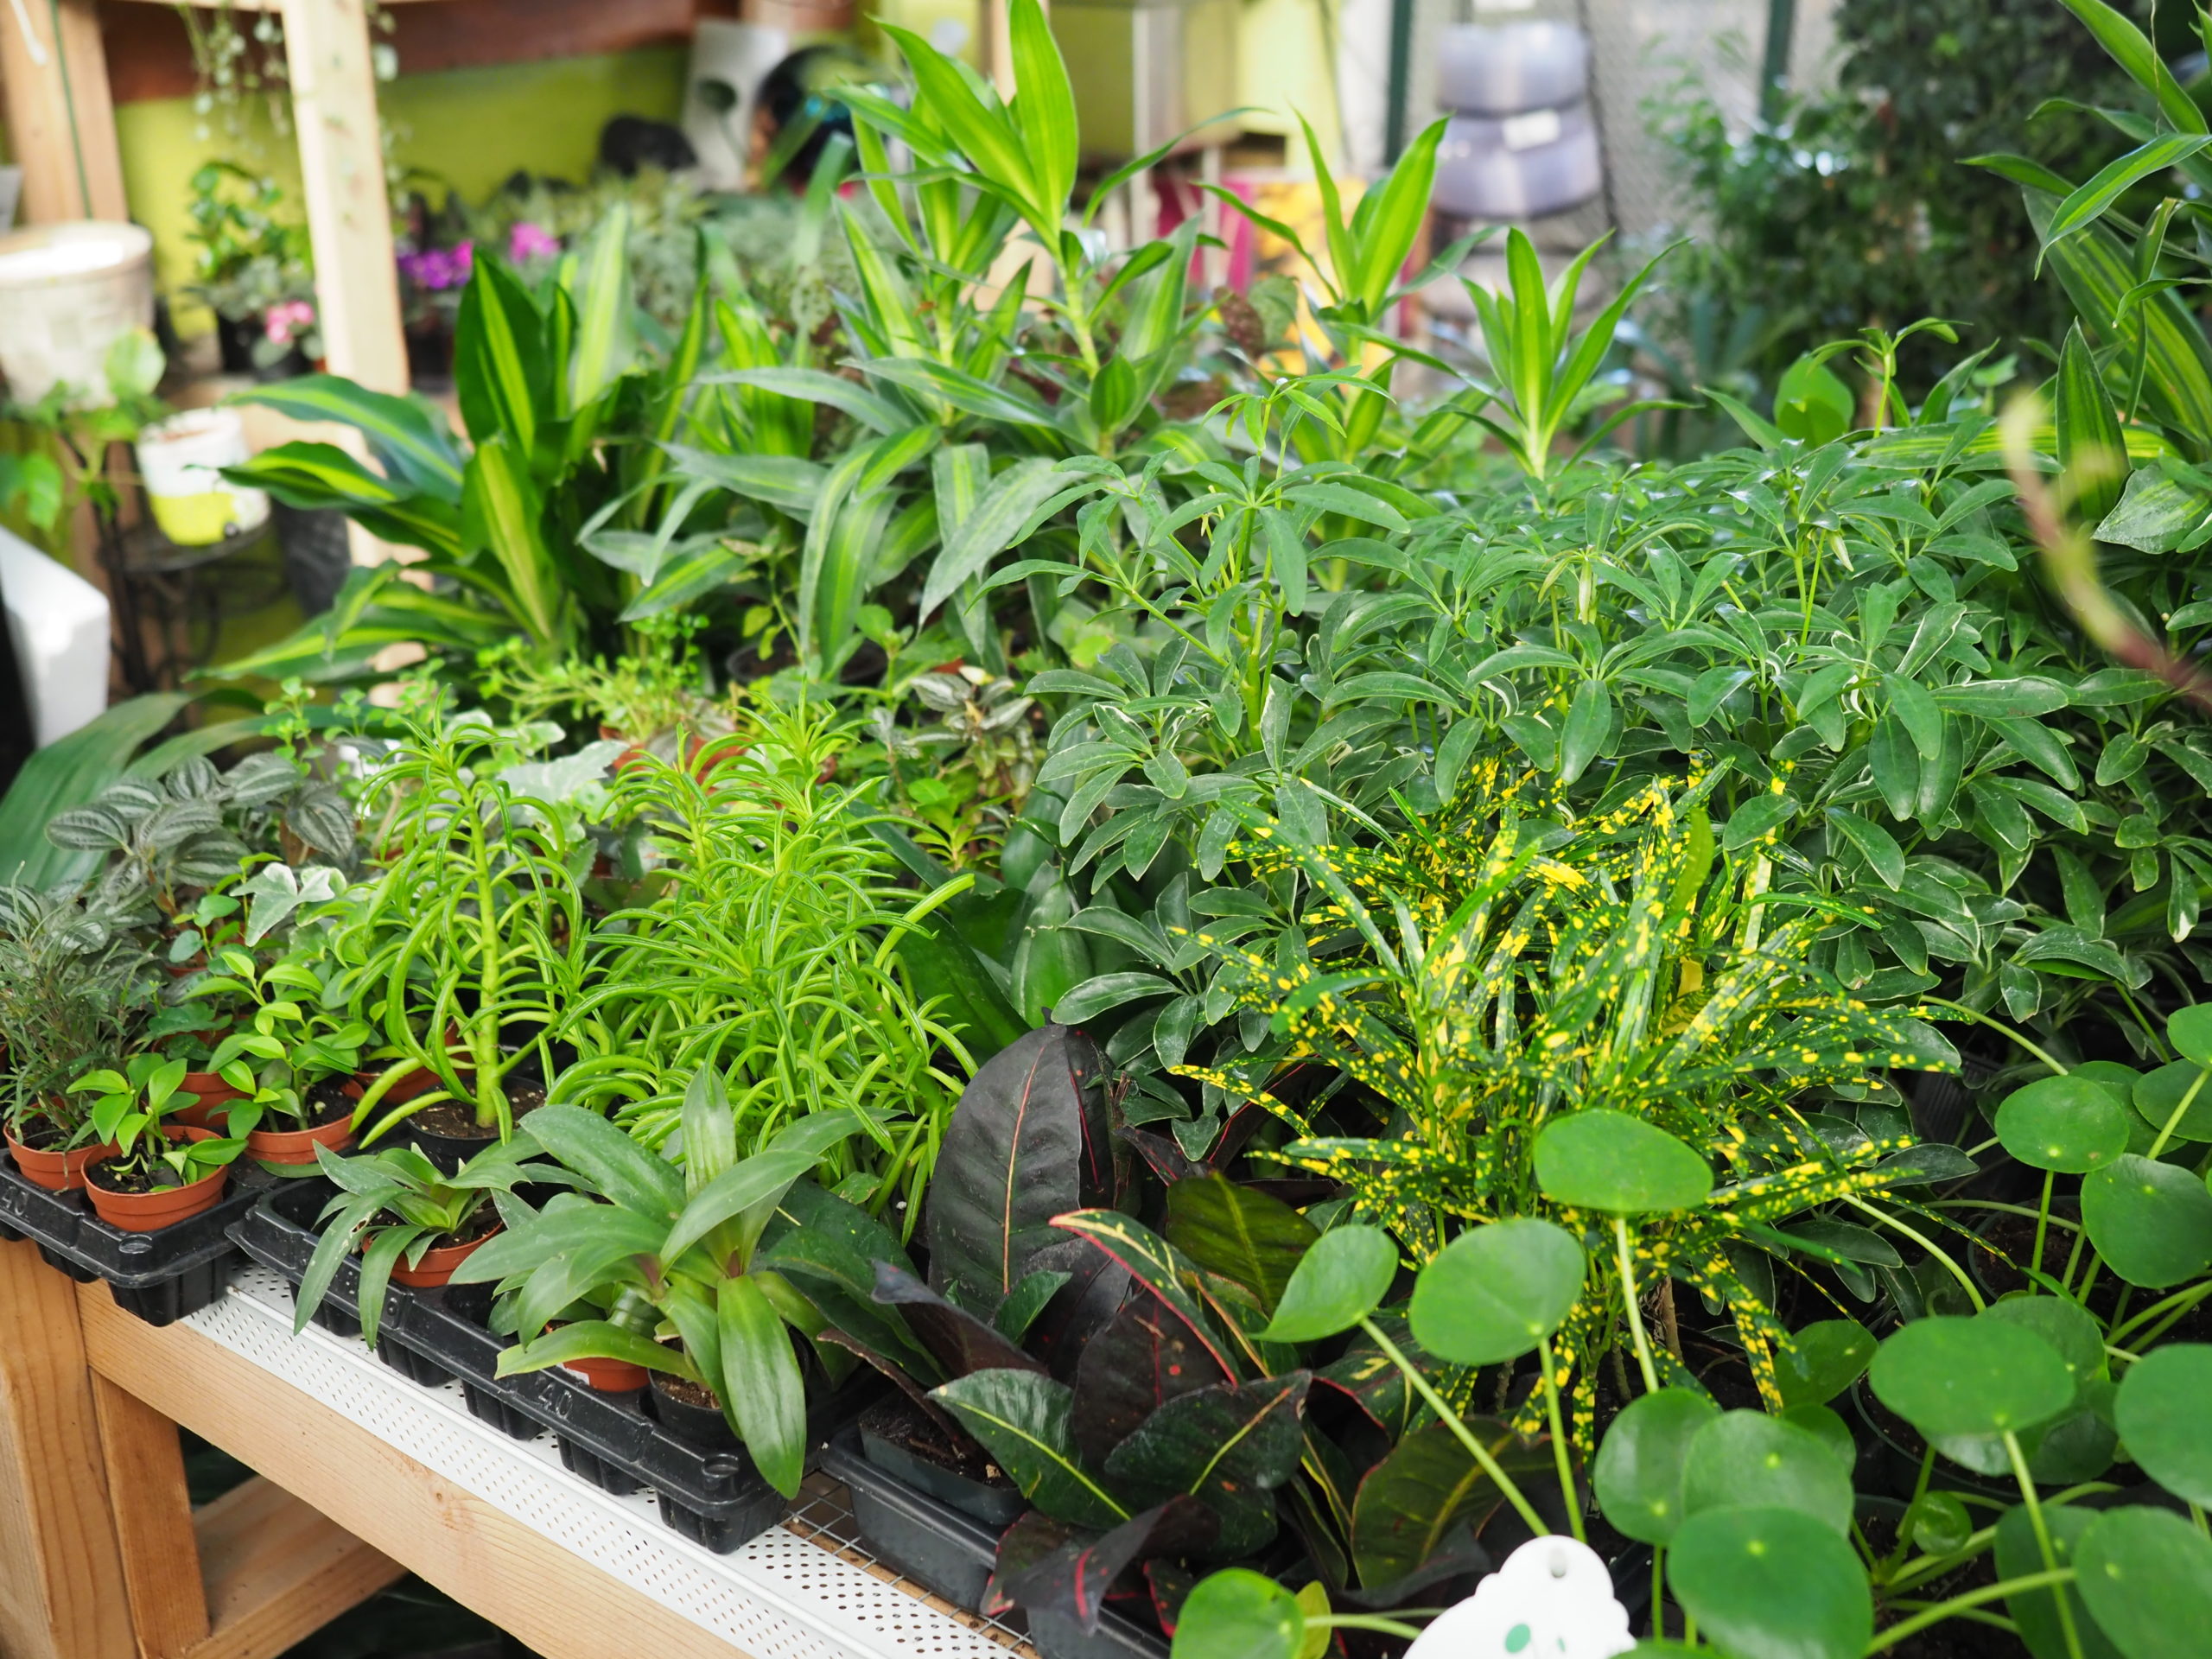 A collection of tropical plants in 2-to-3-inch pots can be a great holiday gift that could spark a budding gardener. Teach them well. ANDREW MESSINGER